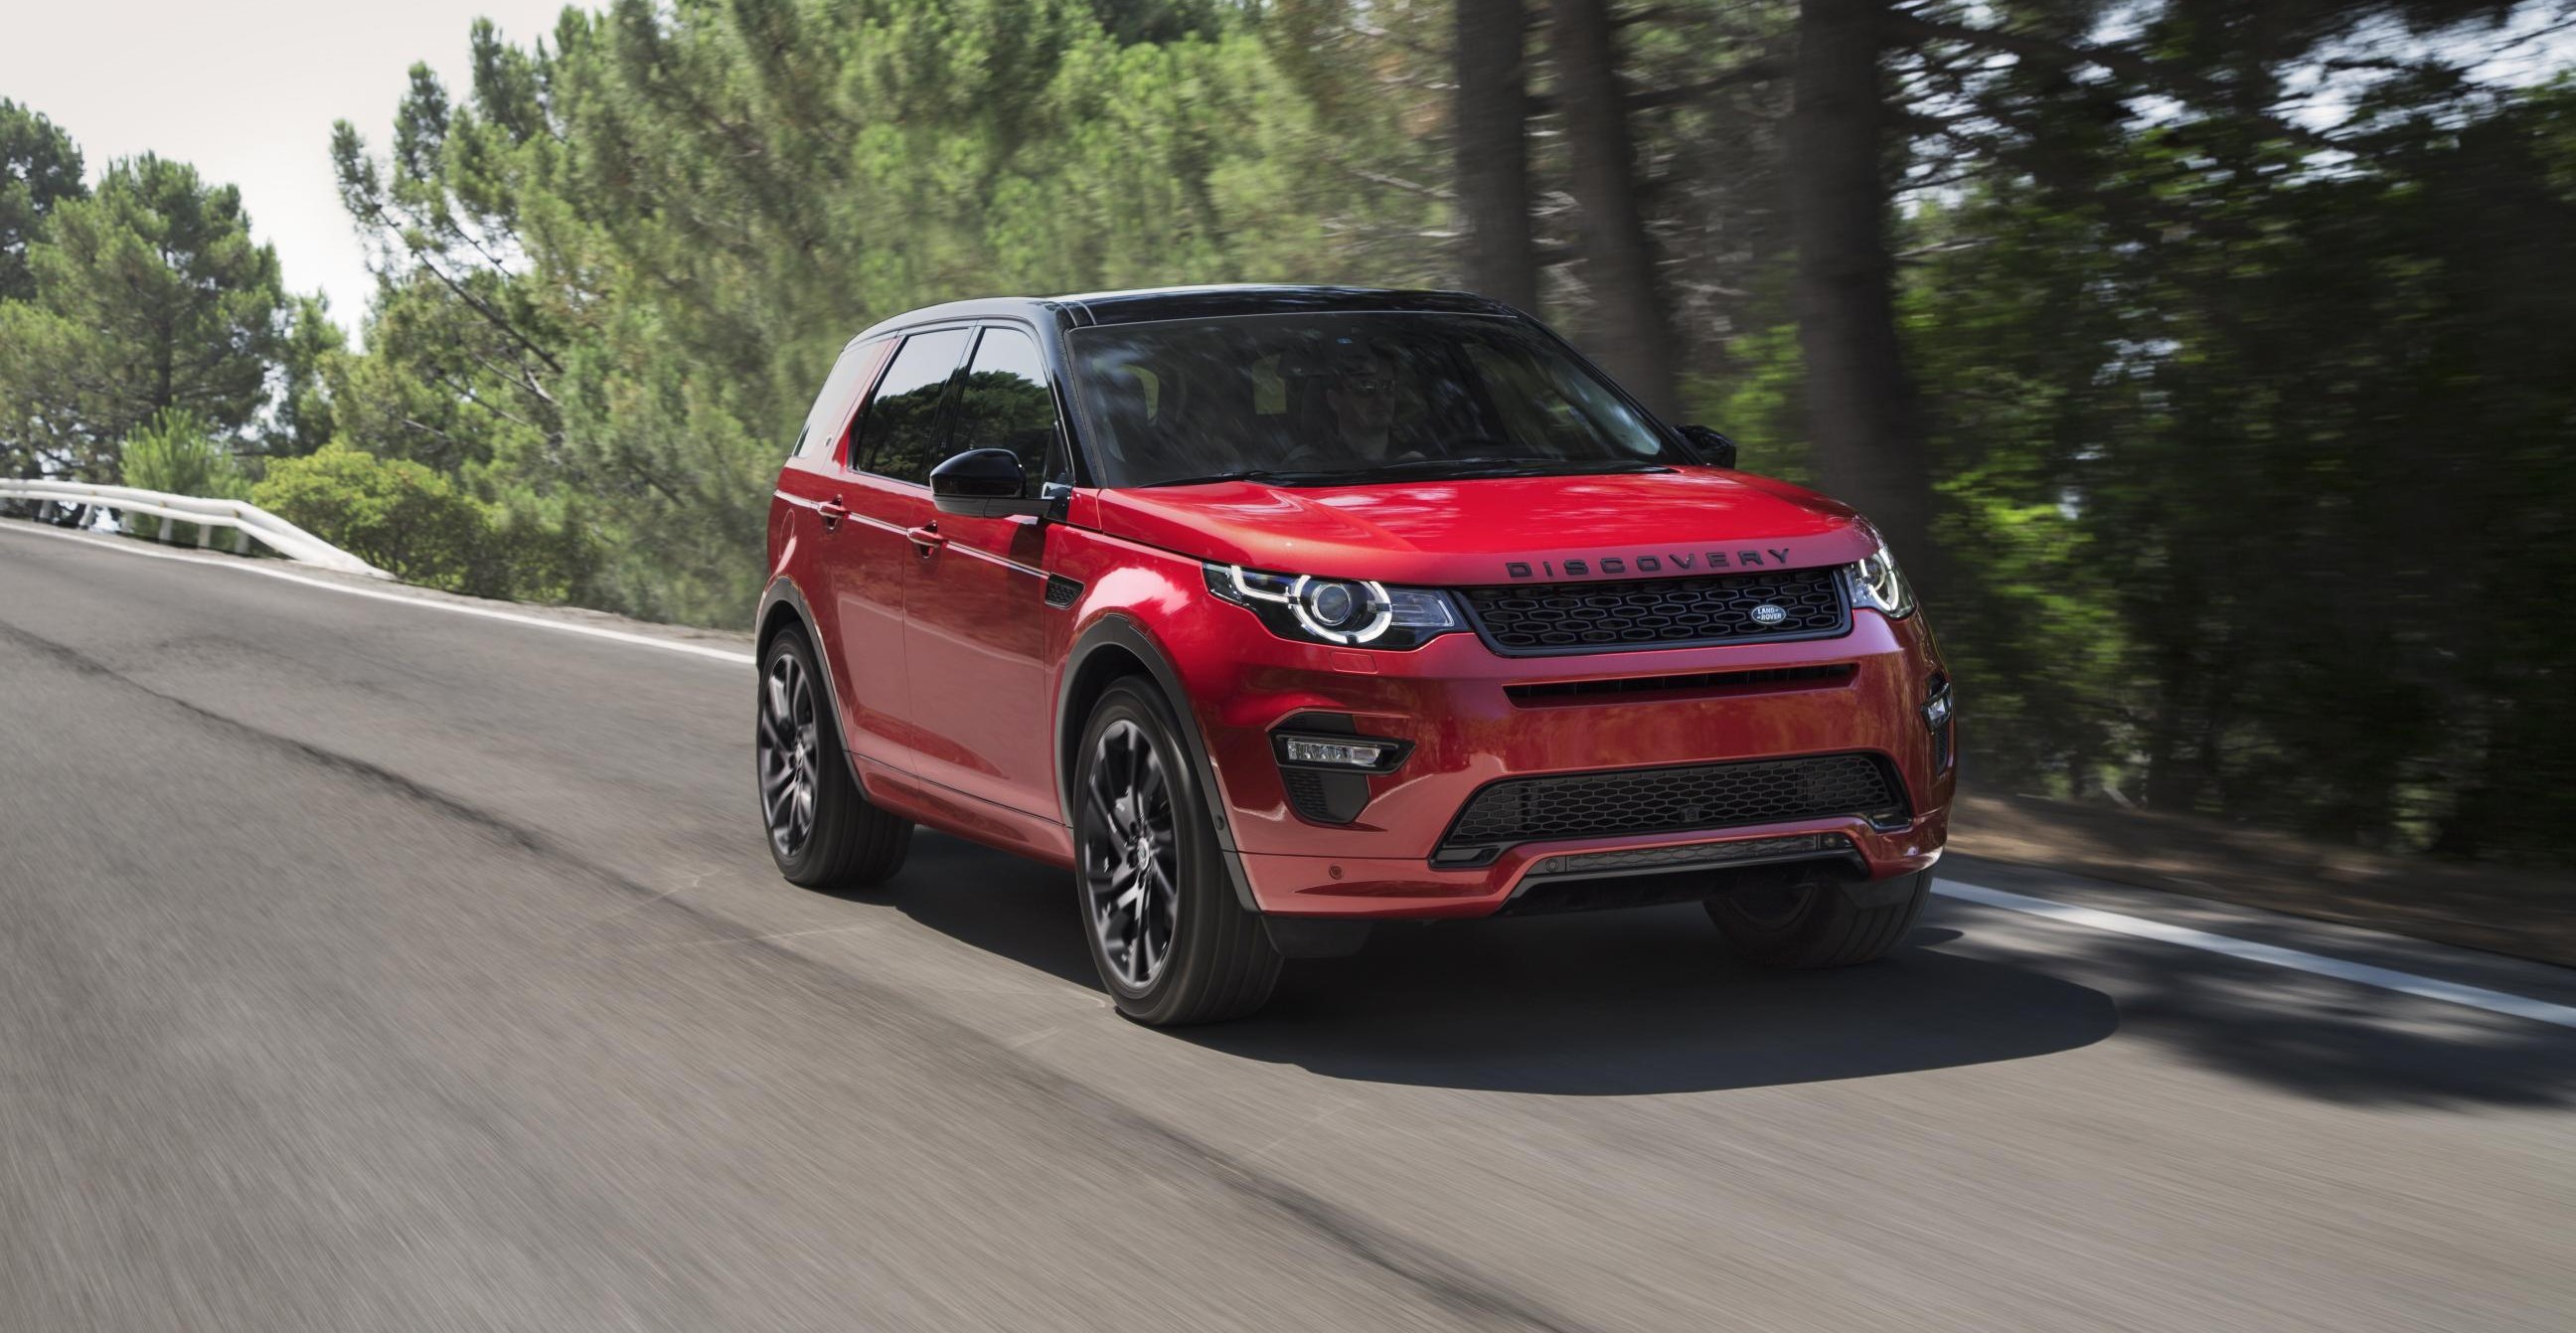 The Land Rover Discovery Sport alternatives